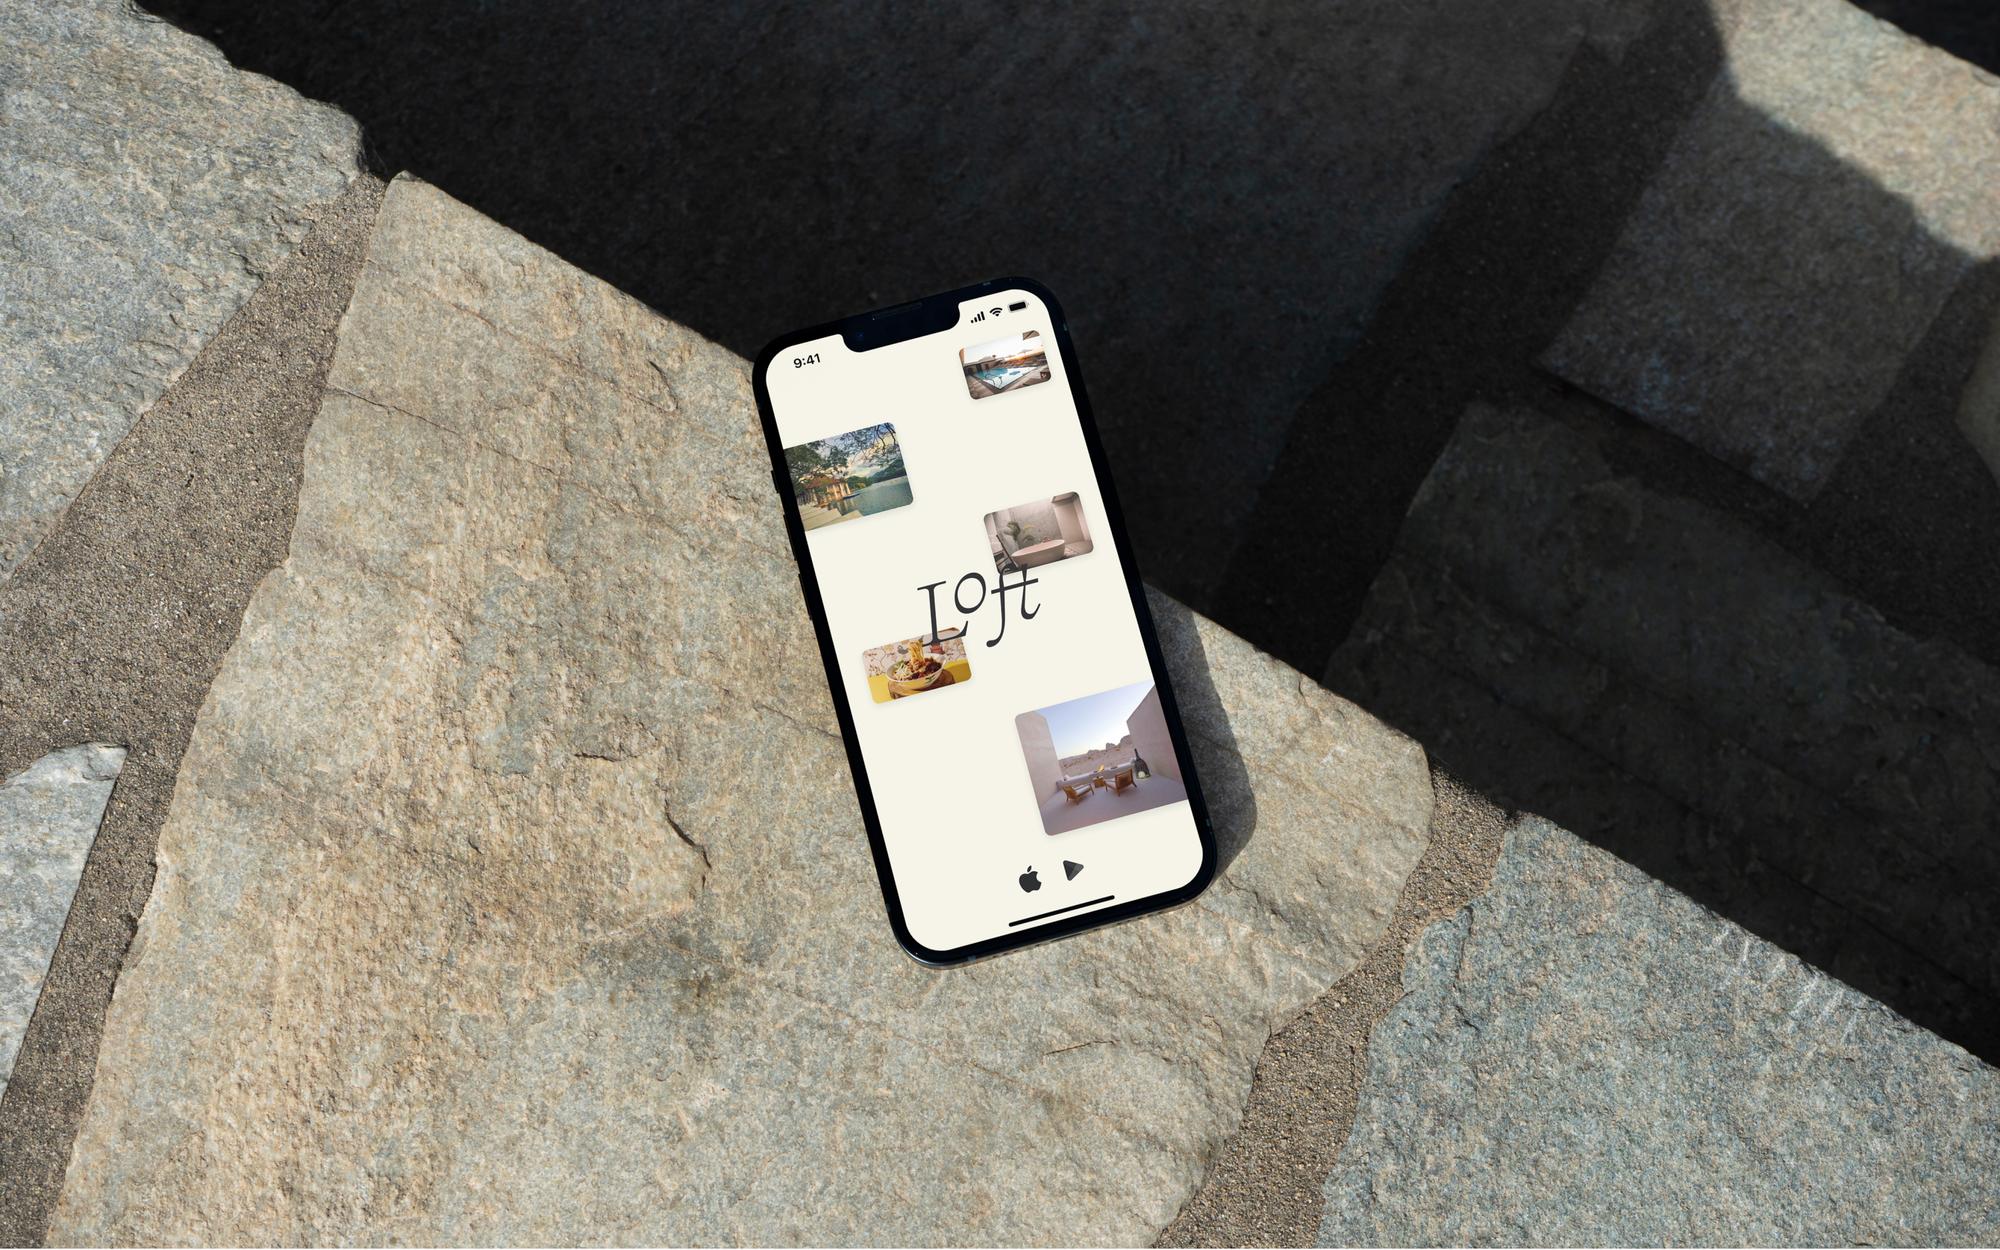 iPhone and Macbook on a concrete surface displaying the room service ordering page and homepage from the Loft project